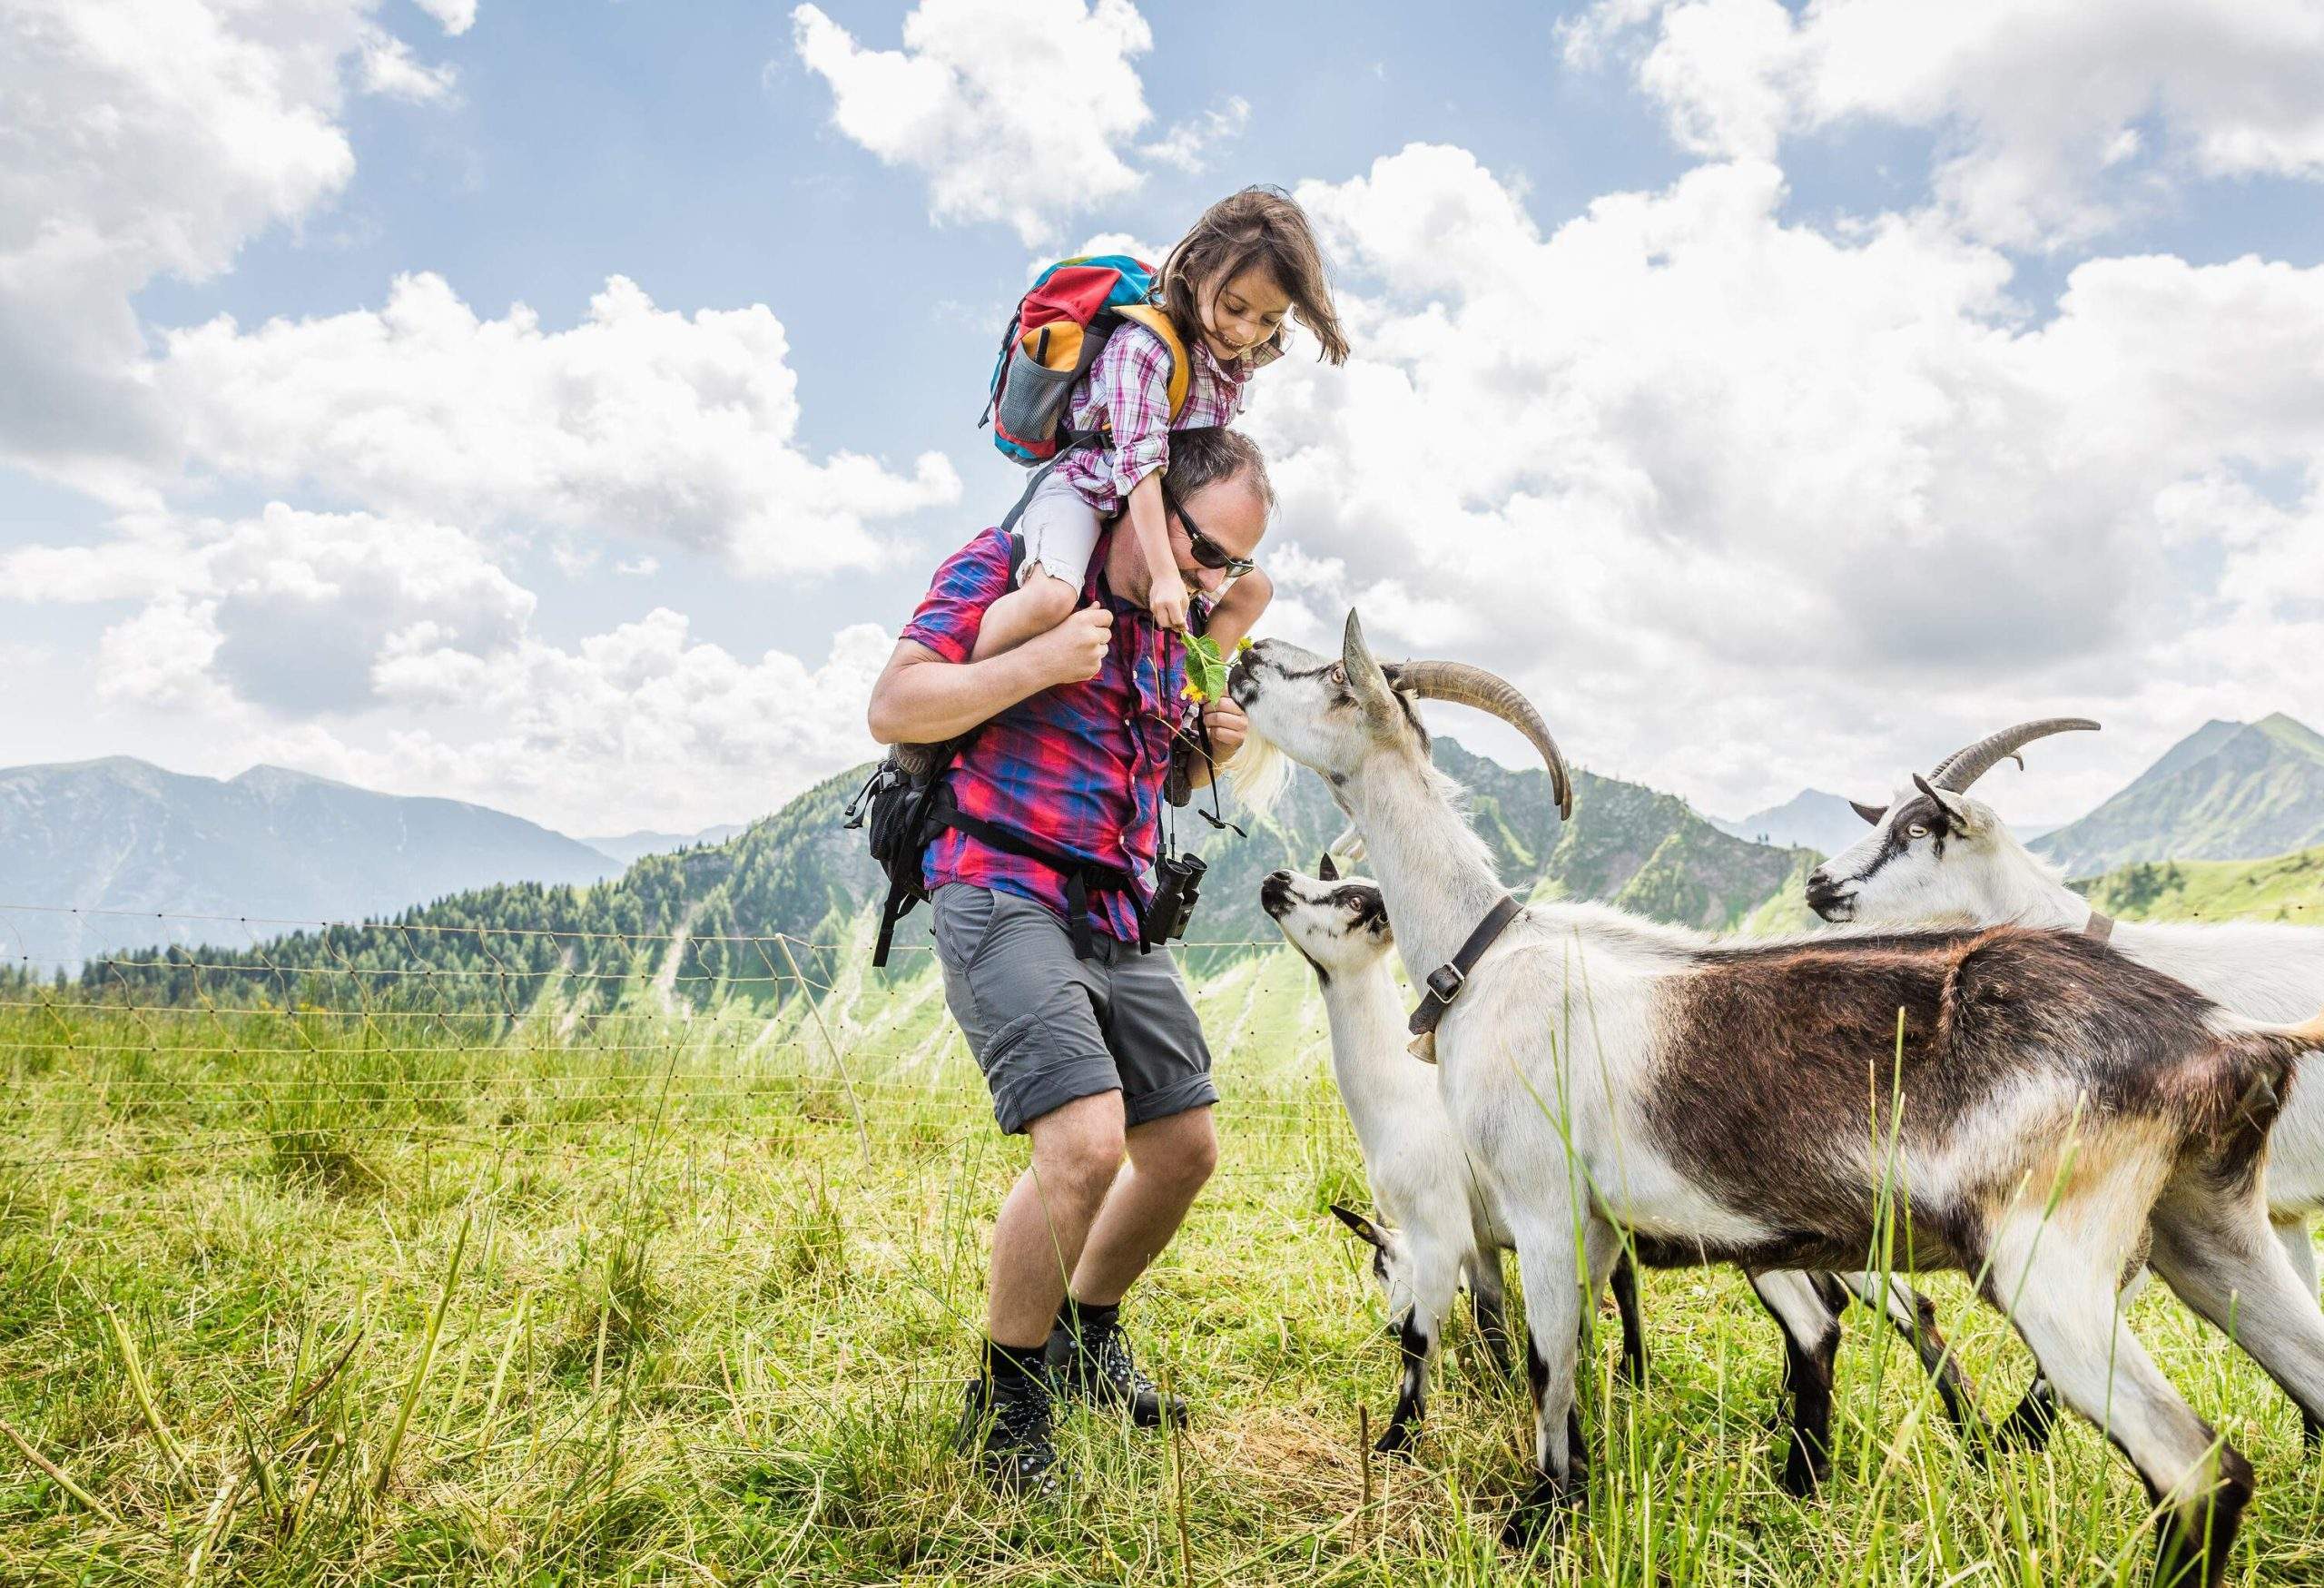 A little girl riding on her father's shoulder and feeding the goats.